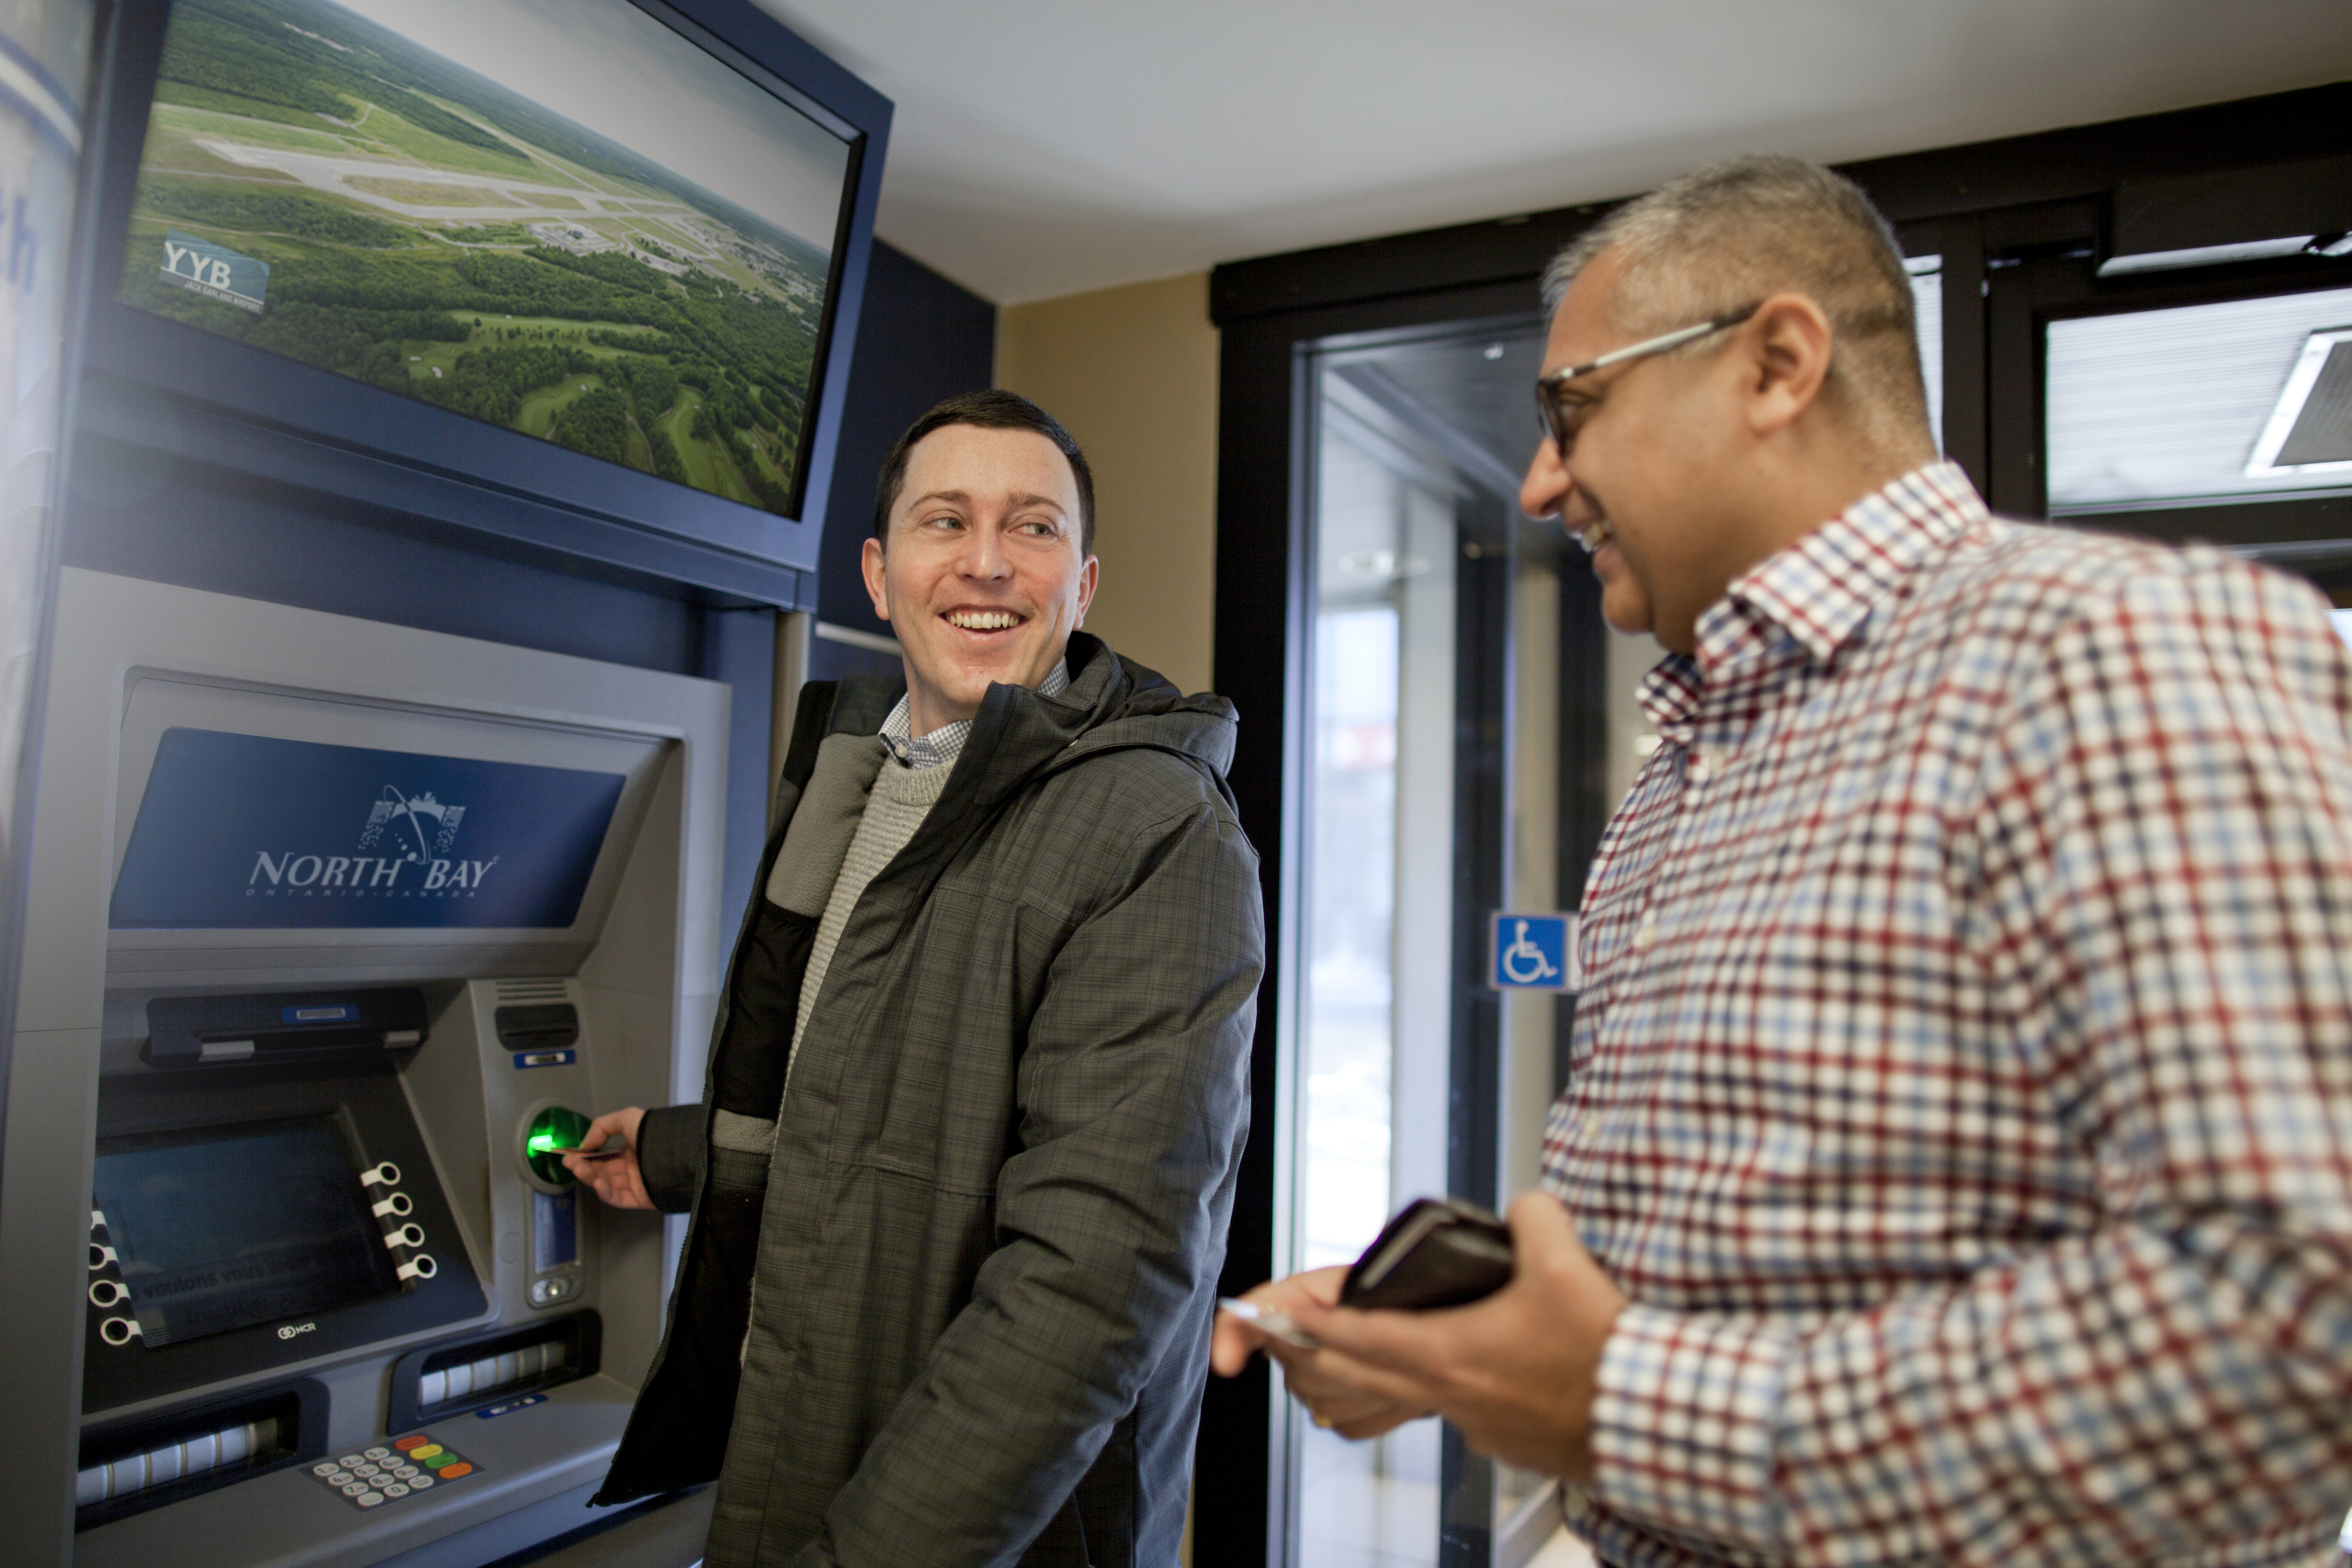 One person at an automatic banking machine, smiling at person standing behind them